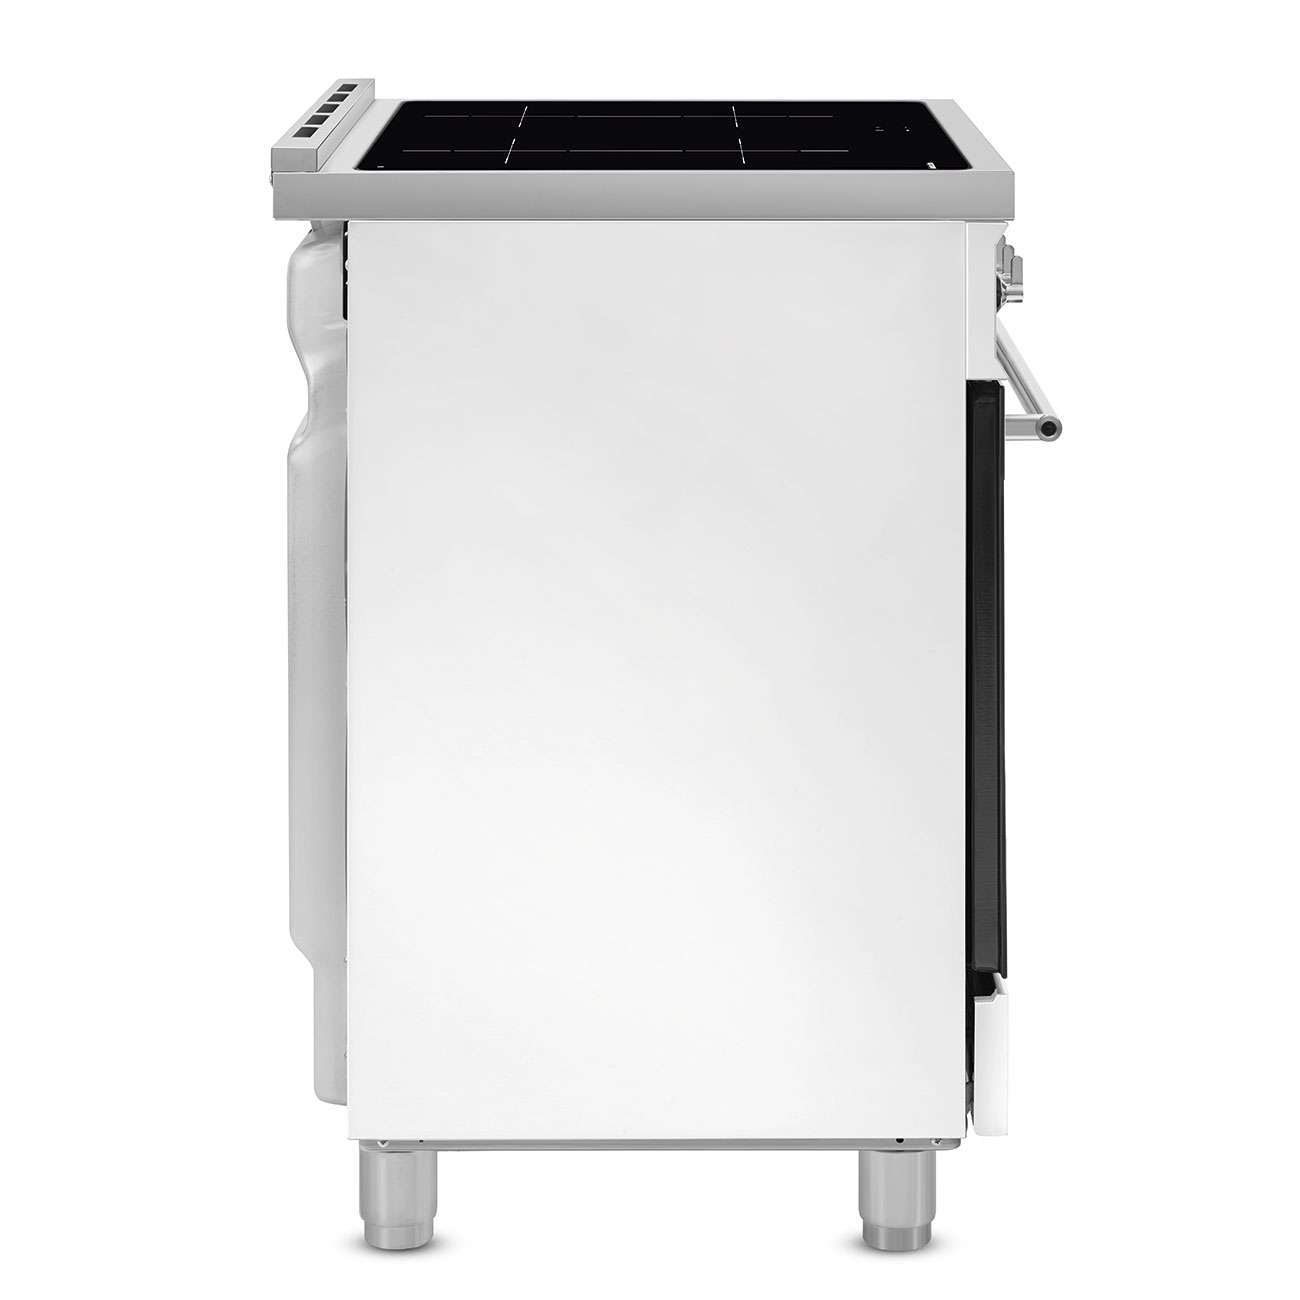 Smeg White Cooker with Induction Hob_7